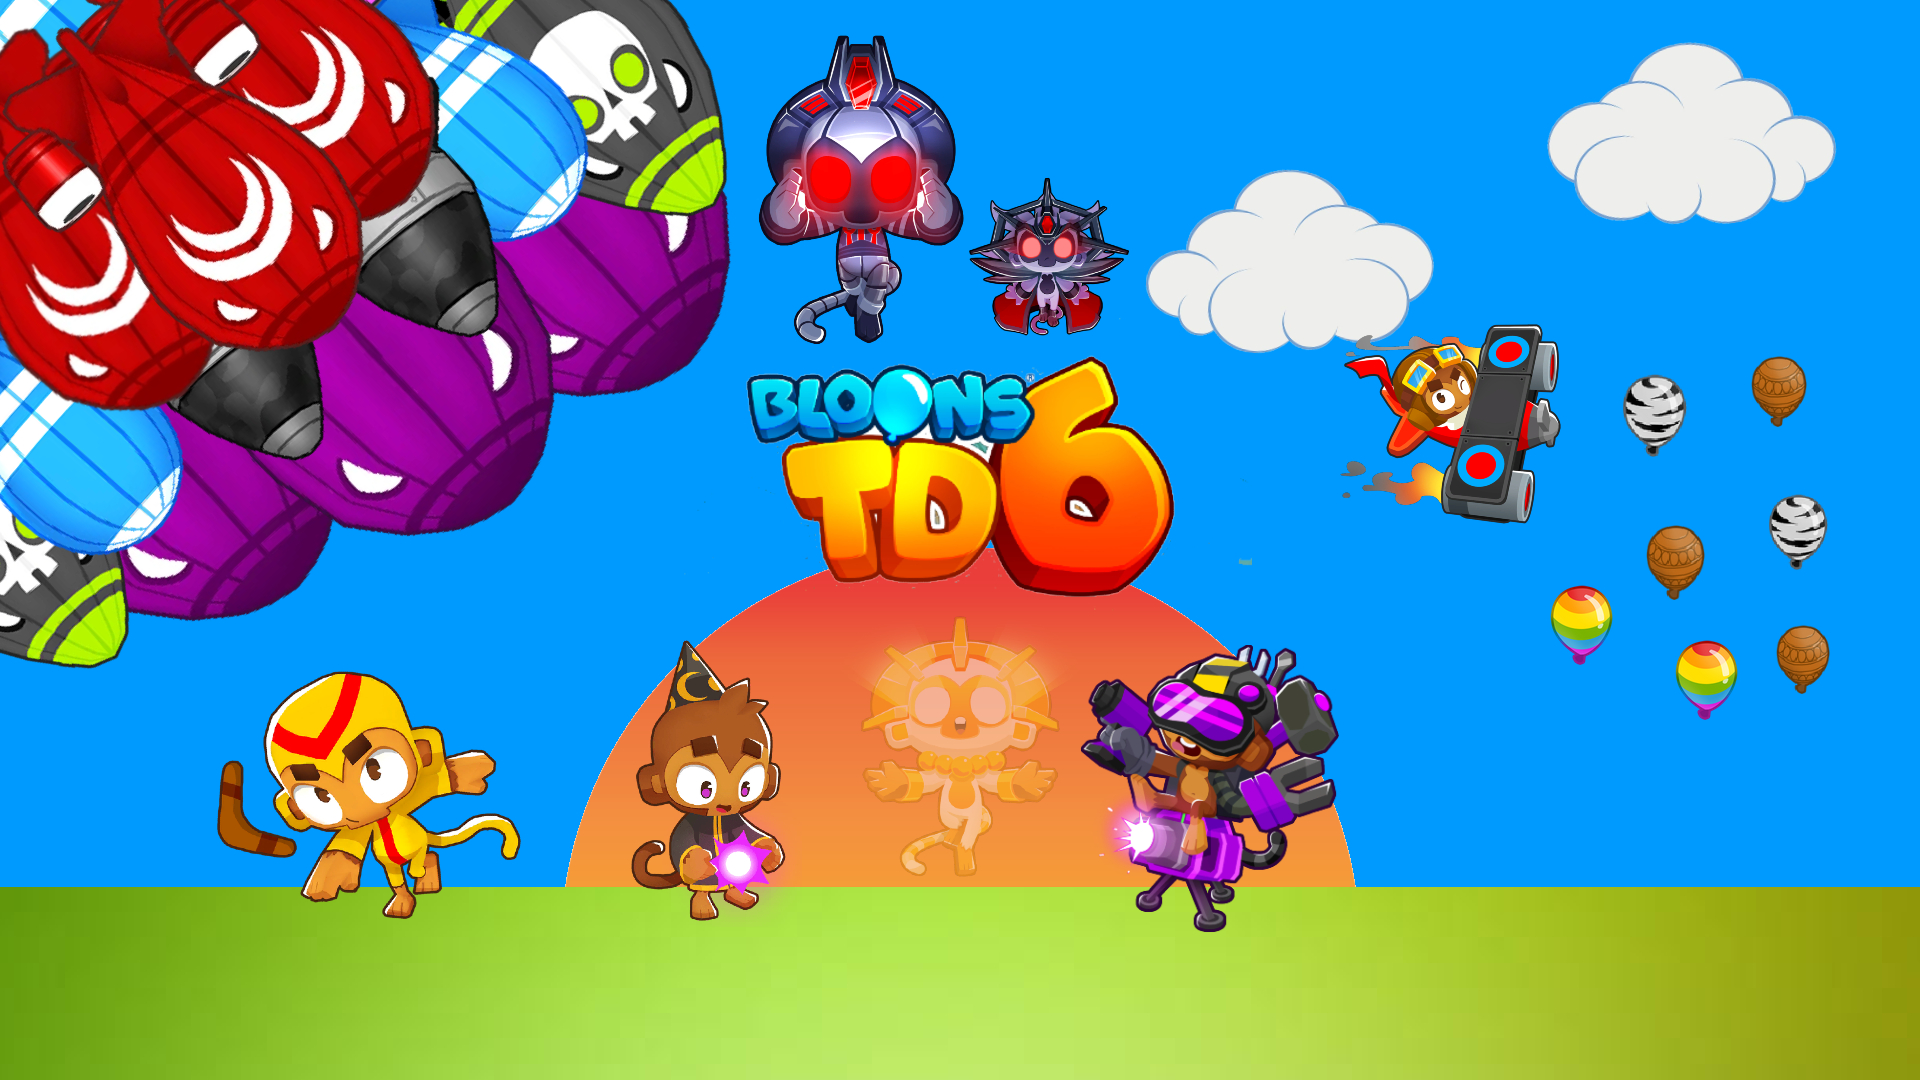 Video Game Bloons TD 6 HD Wallpaper | Background Image